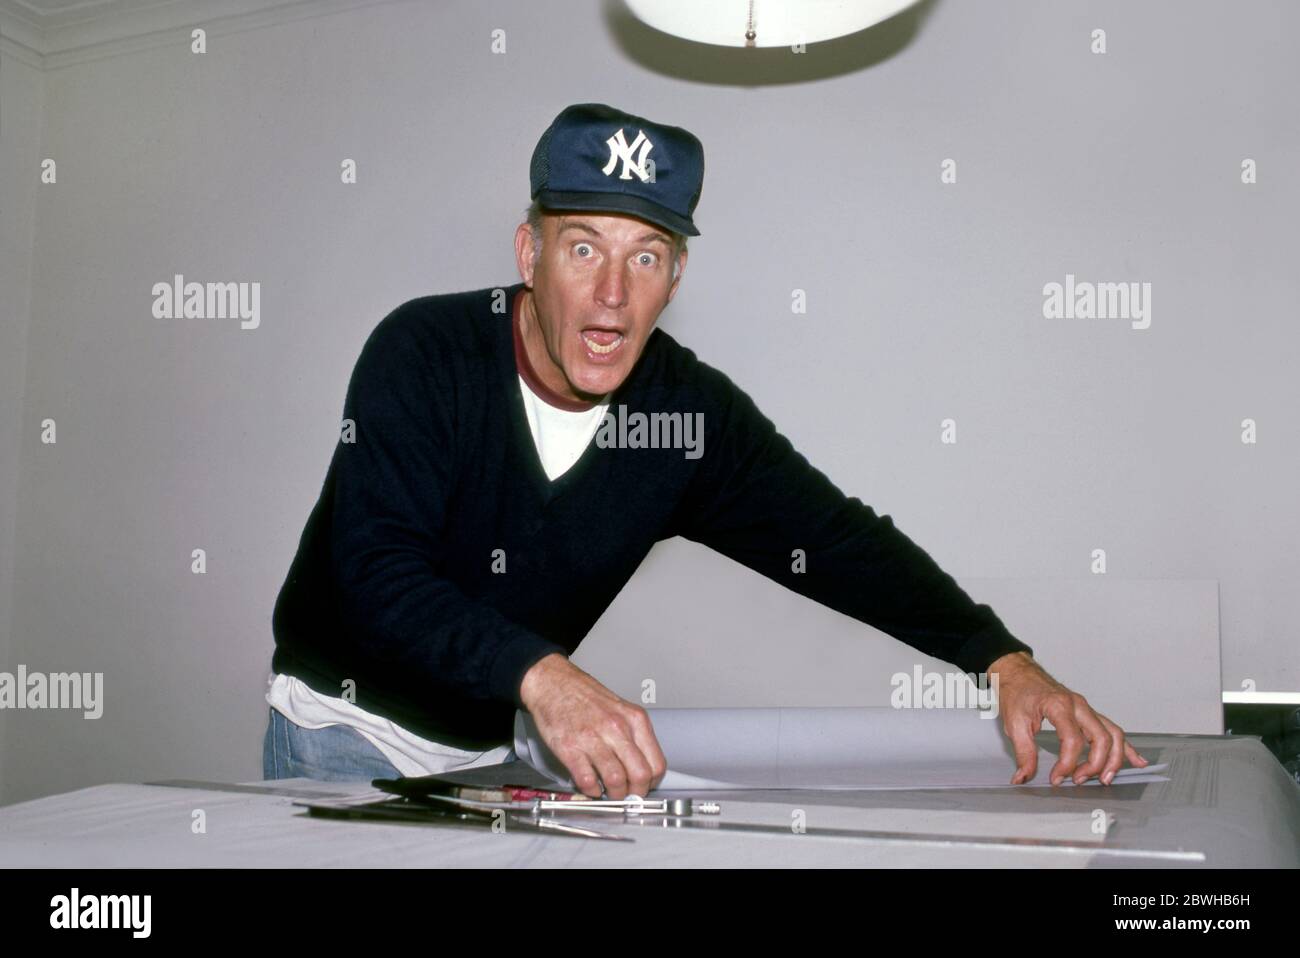 Artist Robert Irwin wearing a New York Yankees baseball cap at work on table in his home in Los Angeles, CA circa 1983 Stock Photo